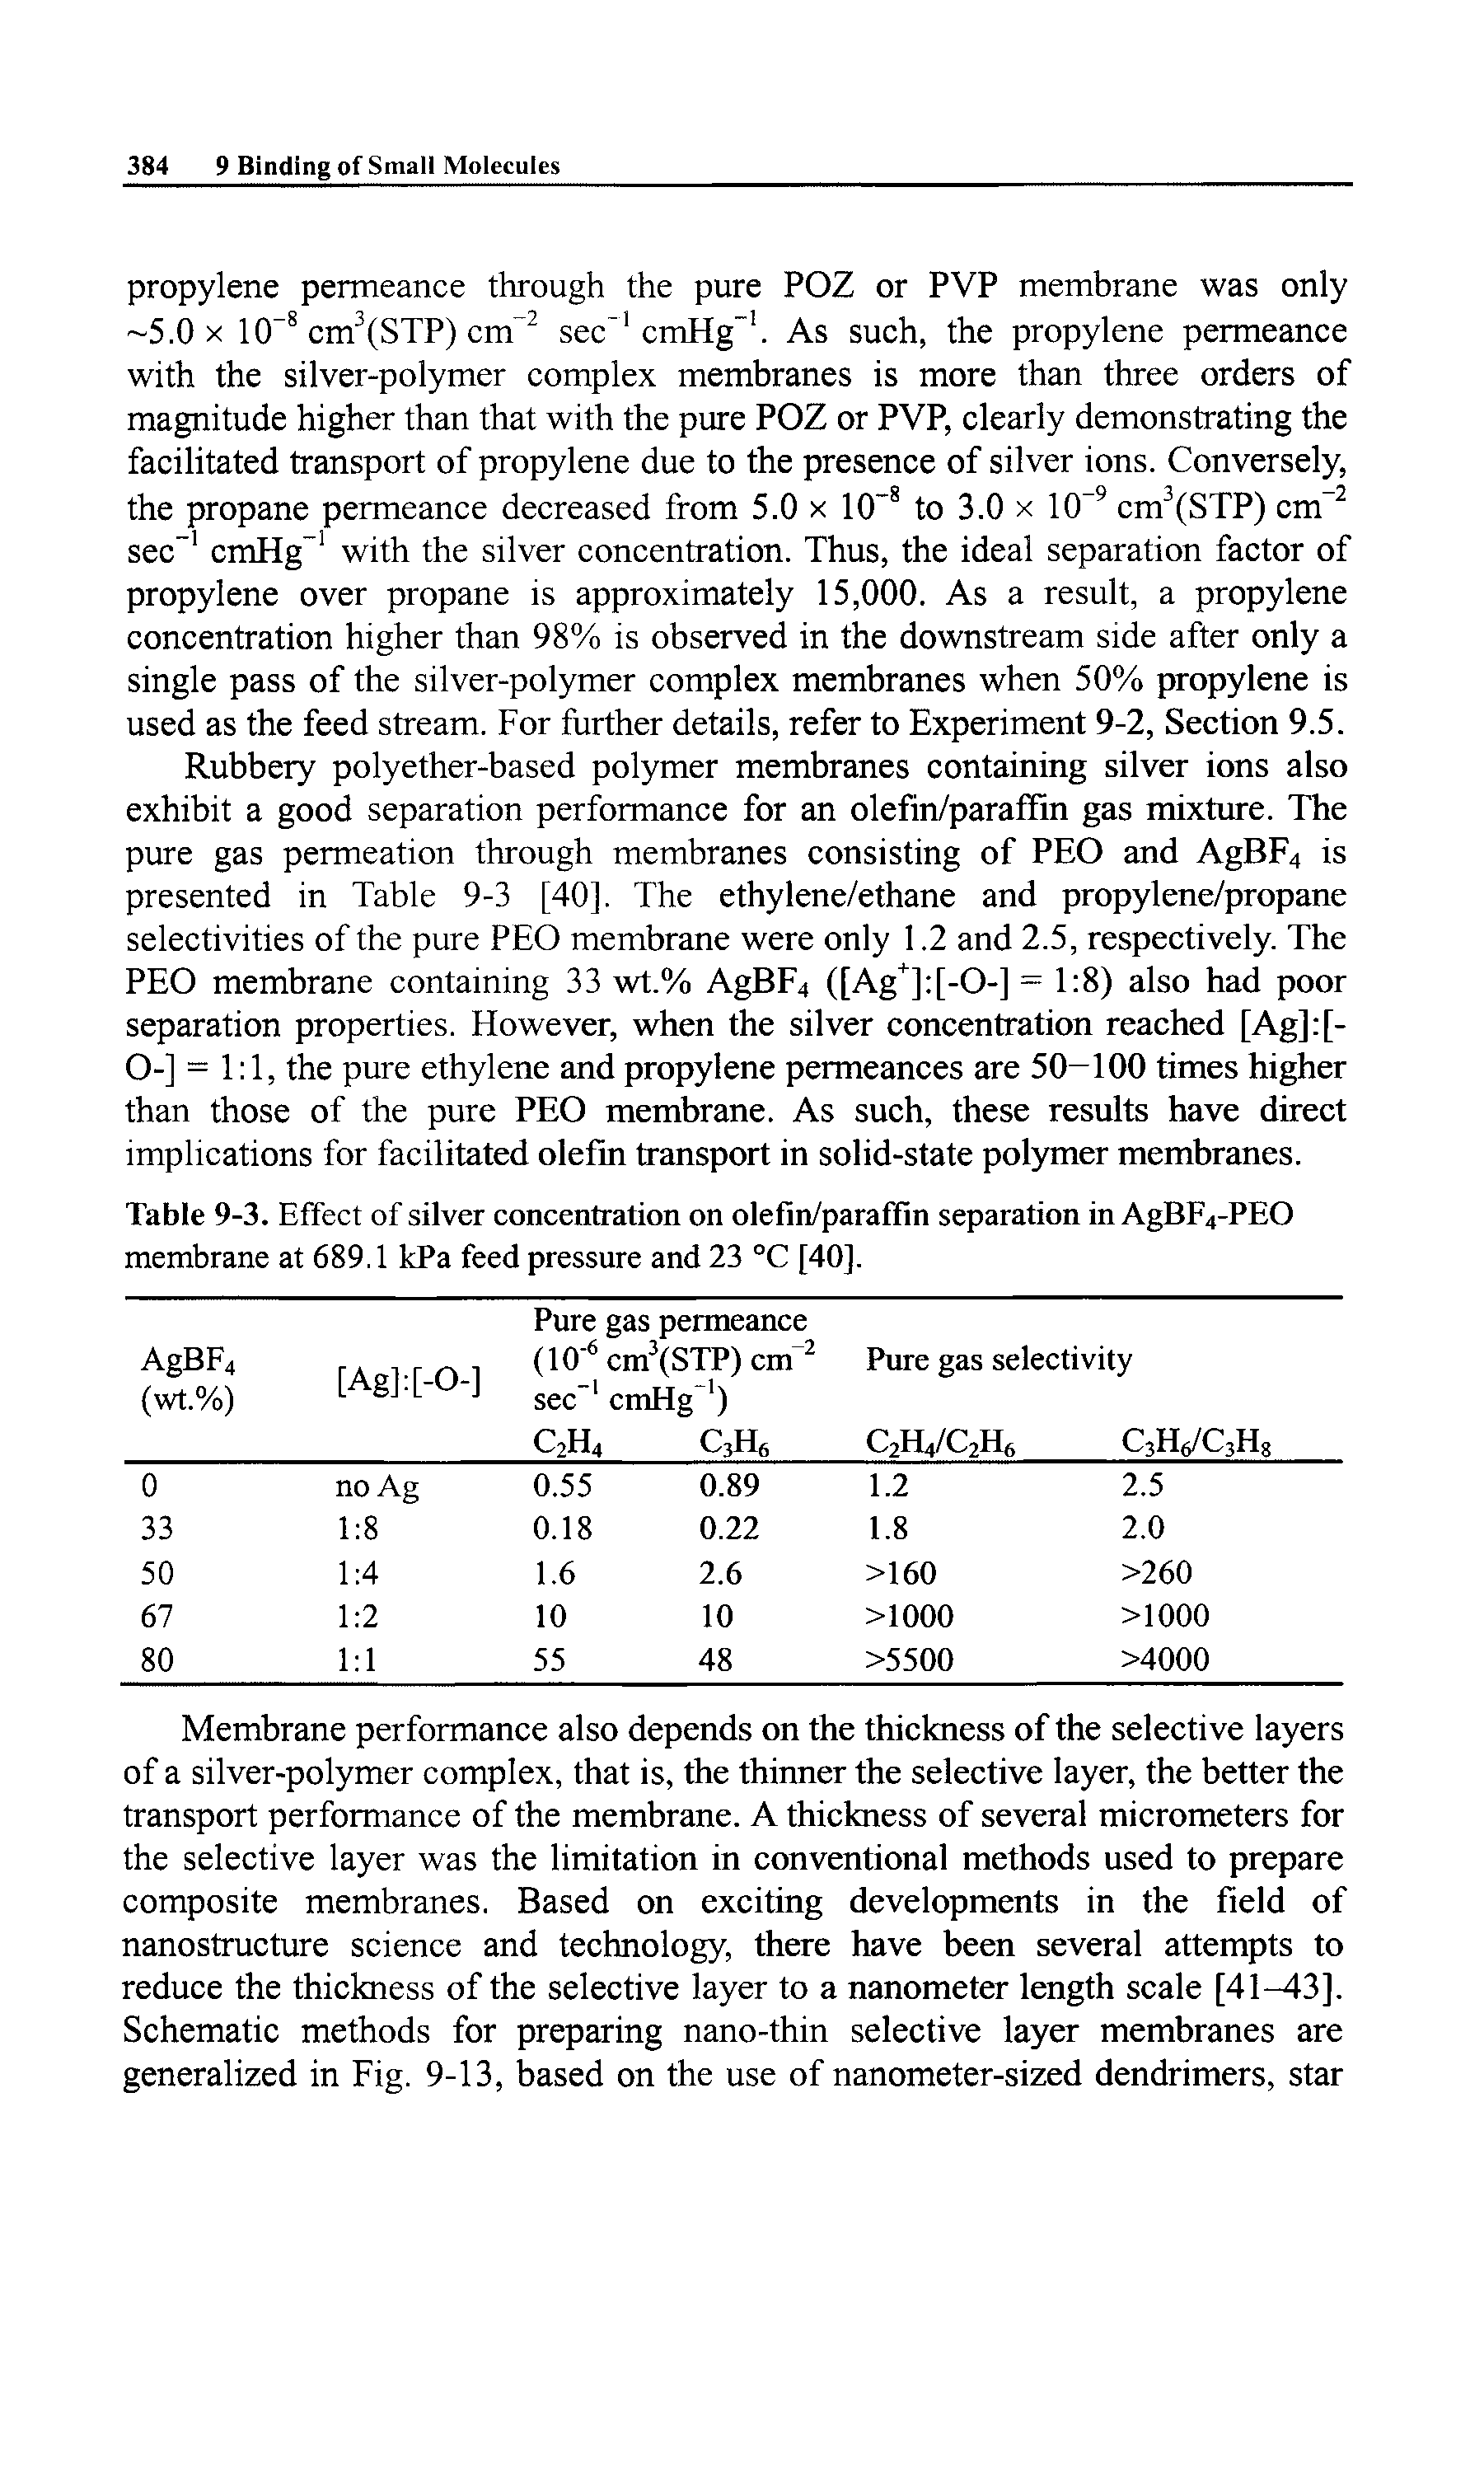 Table 9-3. Effect of silver concentration on olefin/parafFin separation in AgBp4-PEO membrane at 689.1 kPa feed pressure and 23 °C [40].